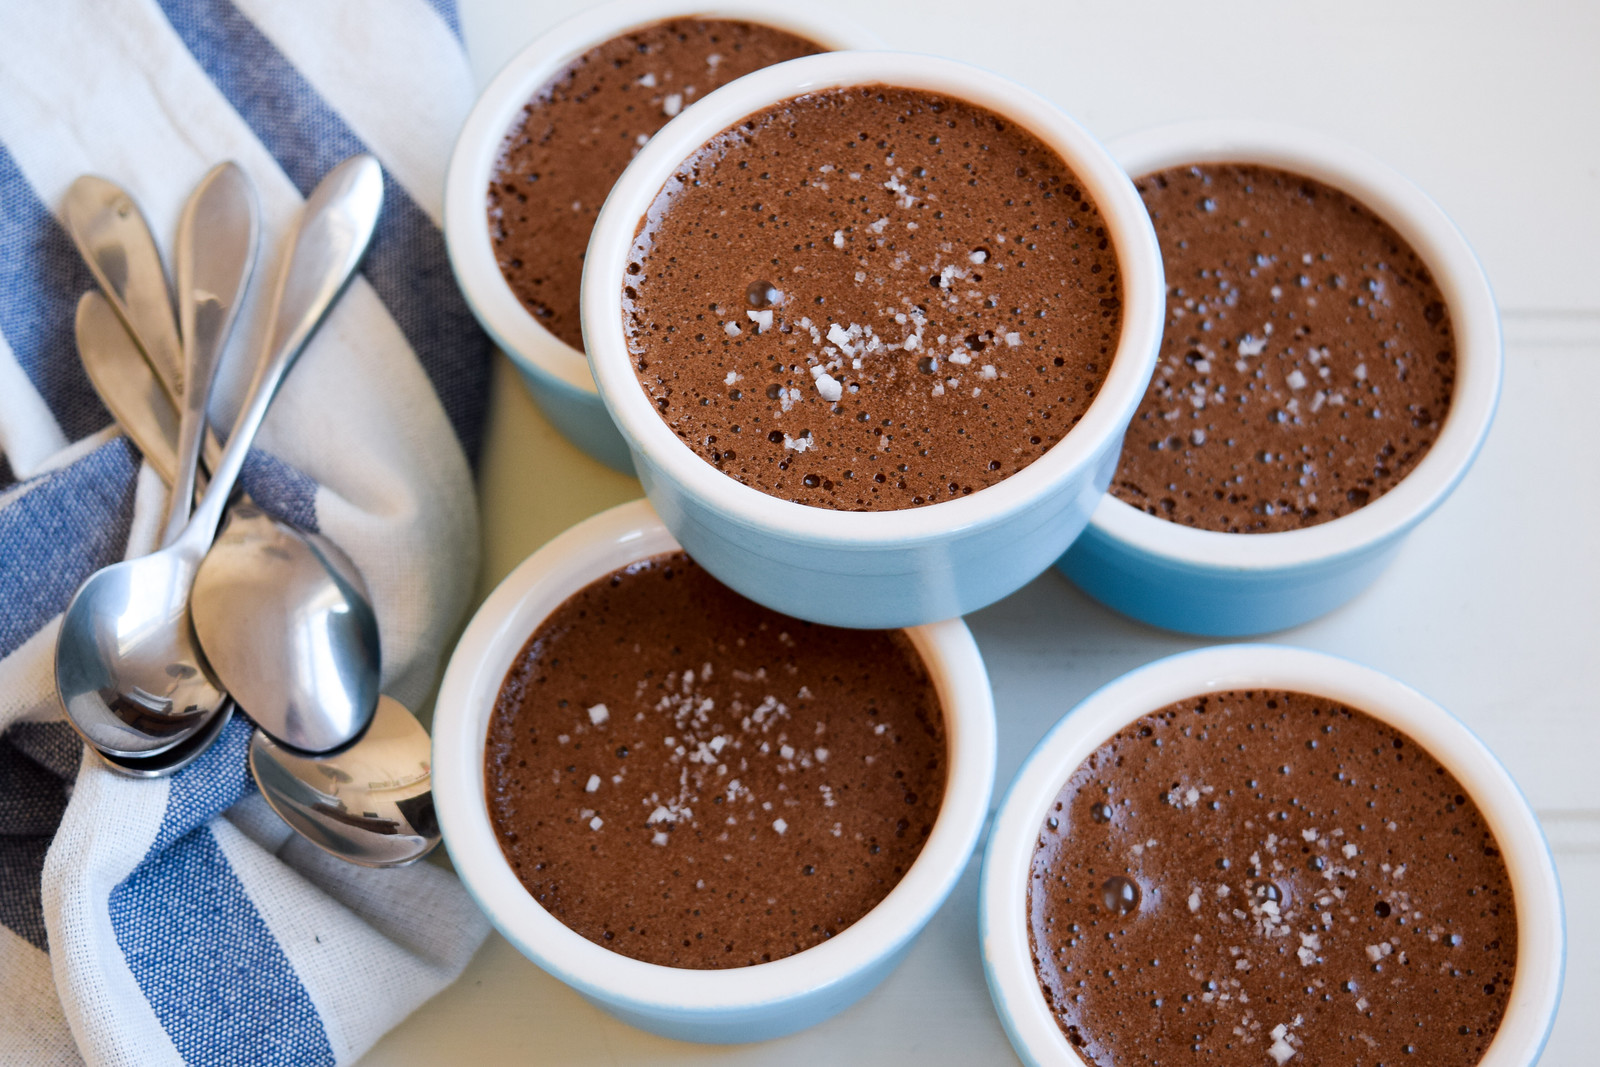 How To Make Olive Oil Chocolate Mousse with Fleur de Sel